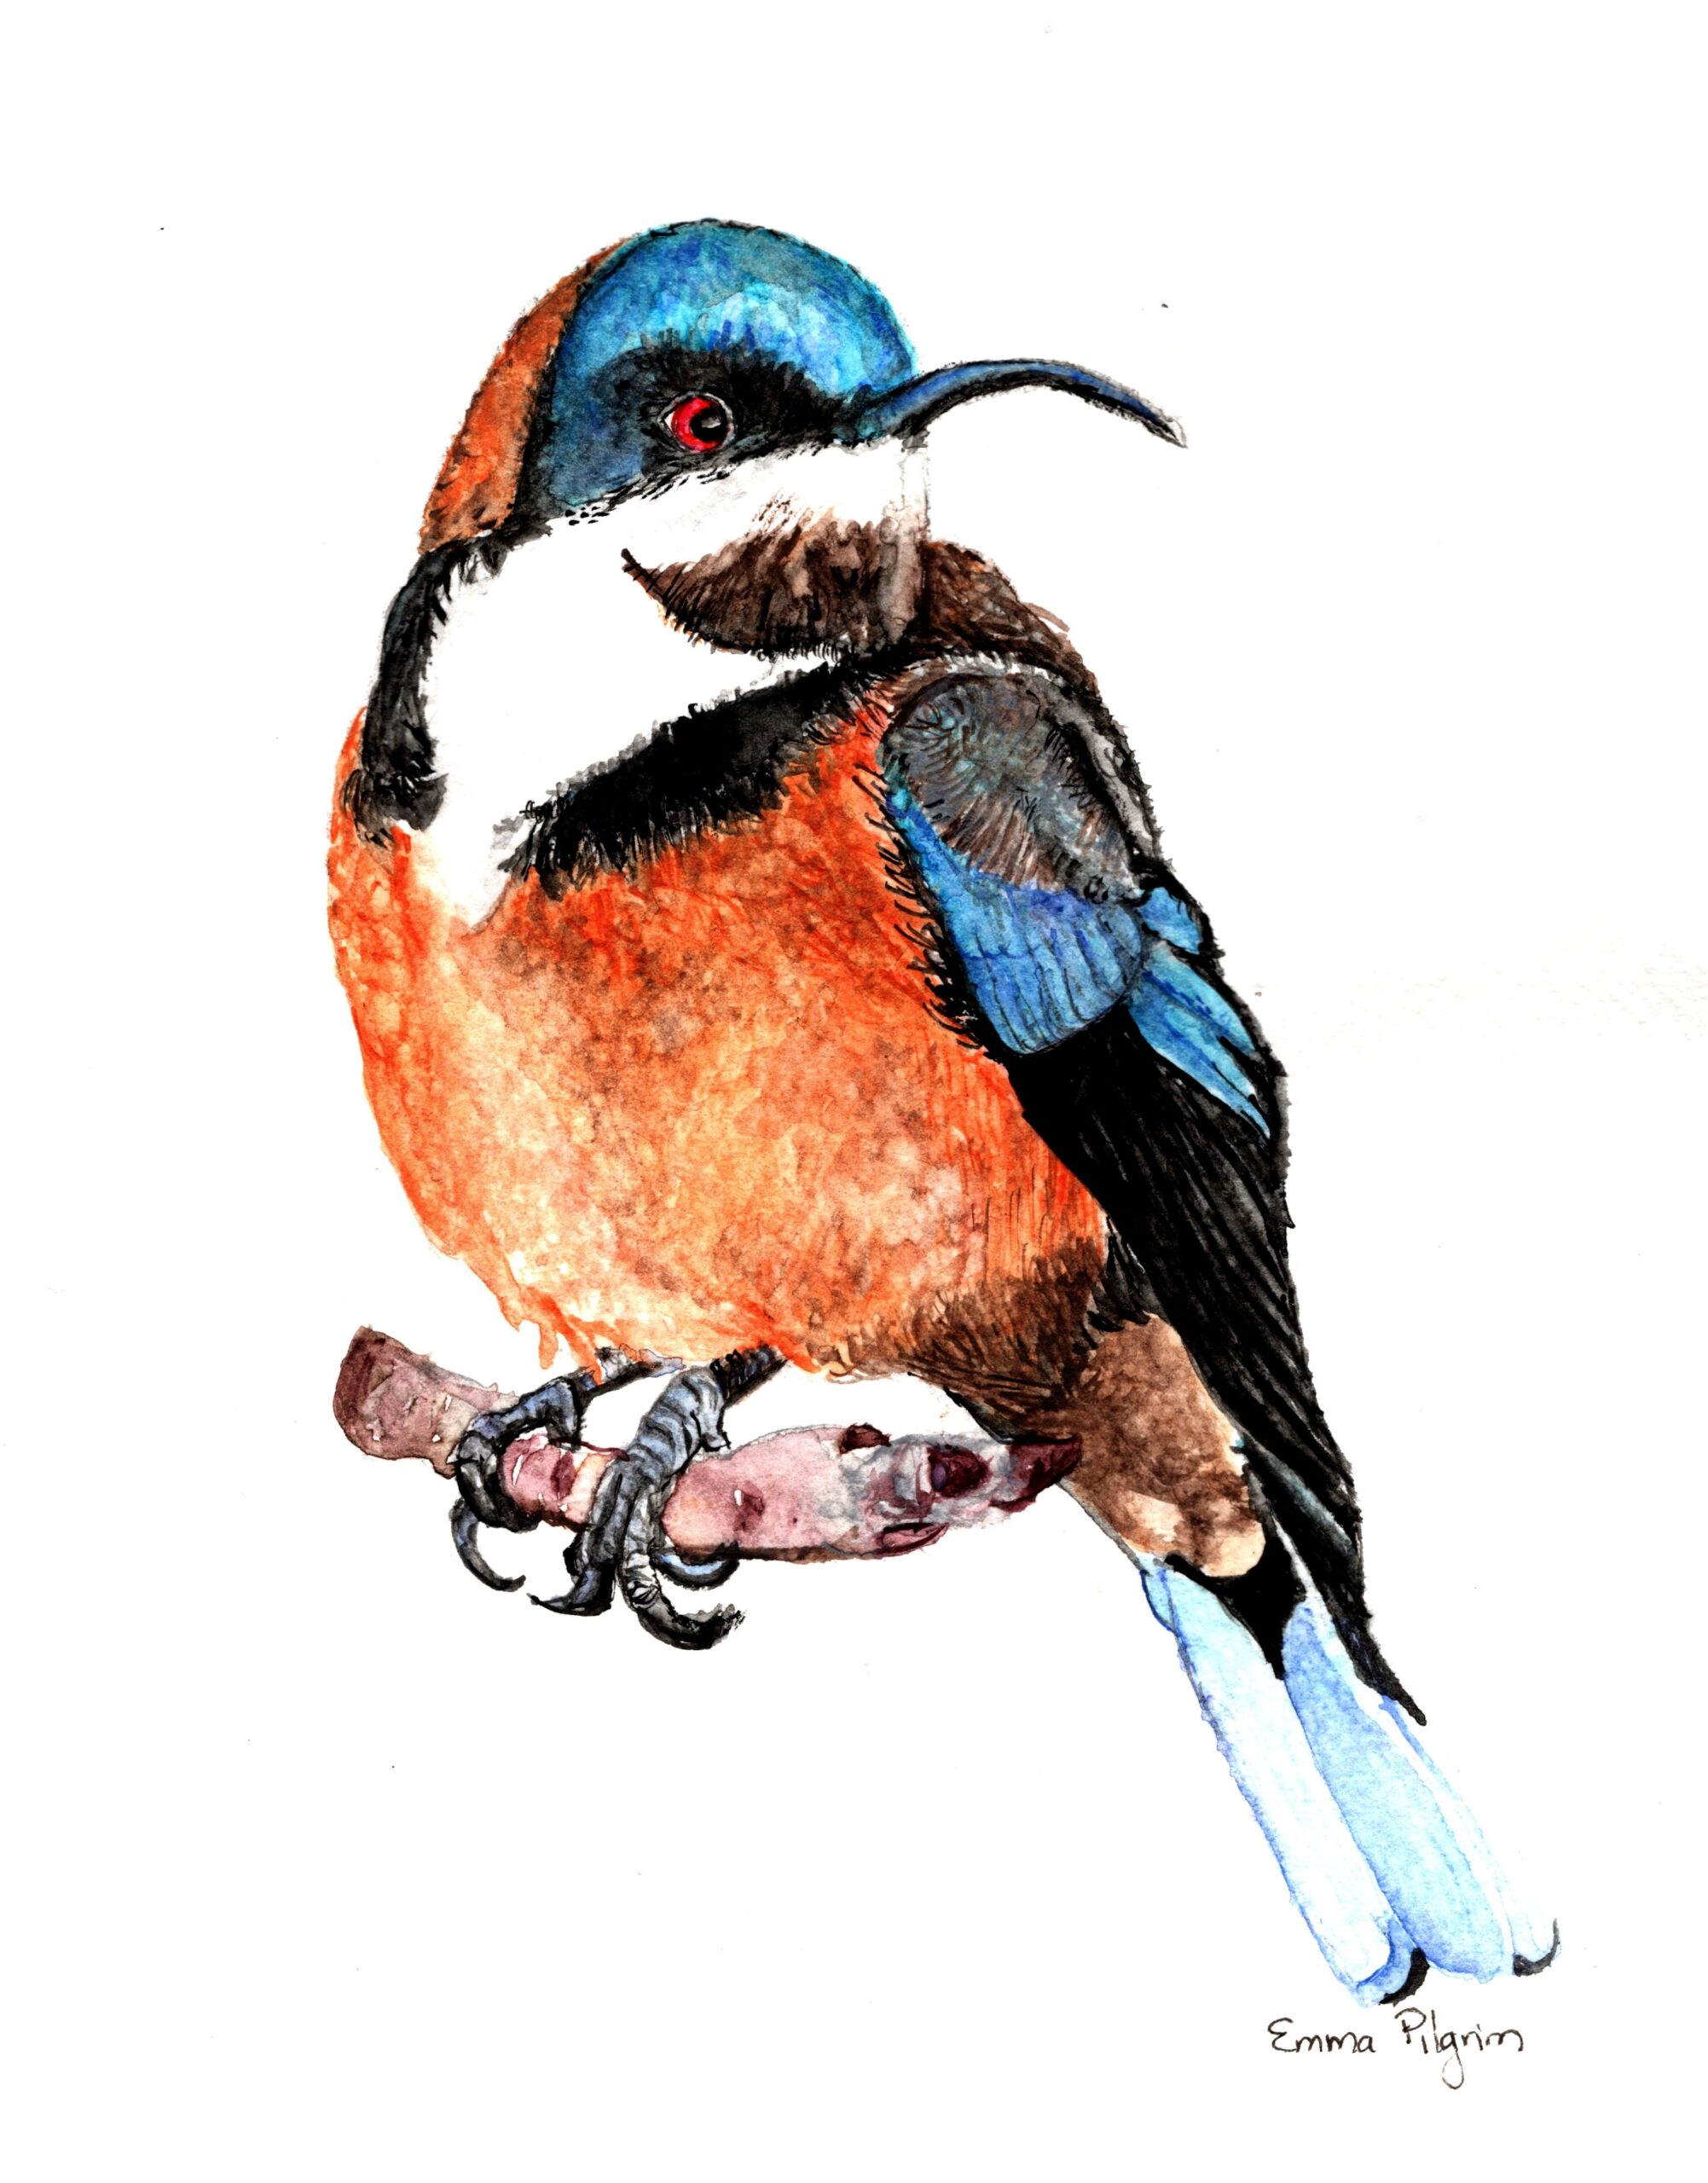 Images shows a watercolour painting of an Eastern Spinebill bird by artist Emma Pilgrim in her Artist Profile story with Art Trails Tasmania